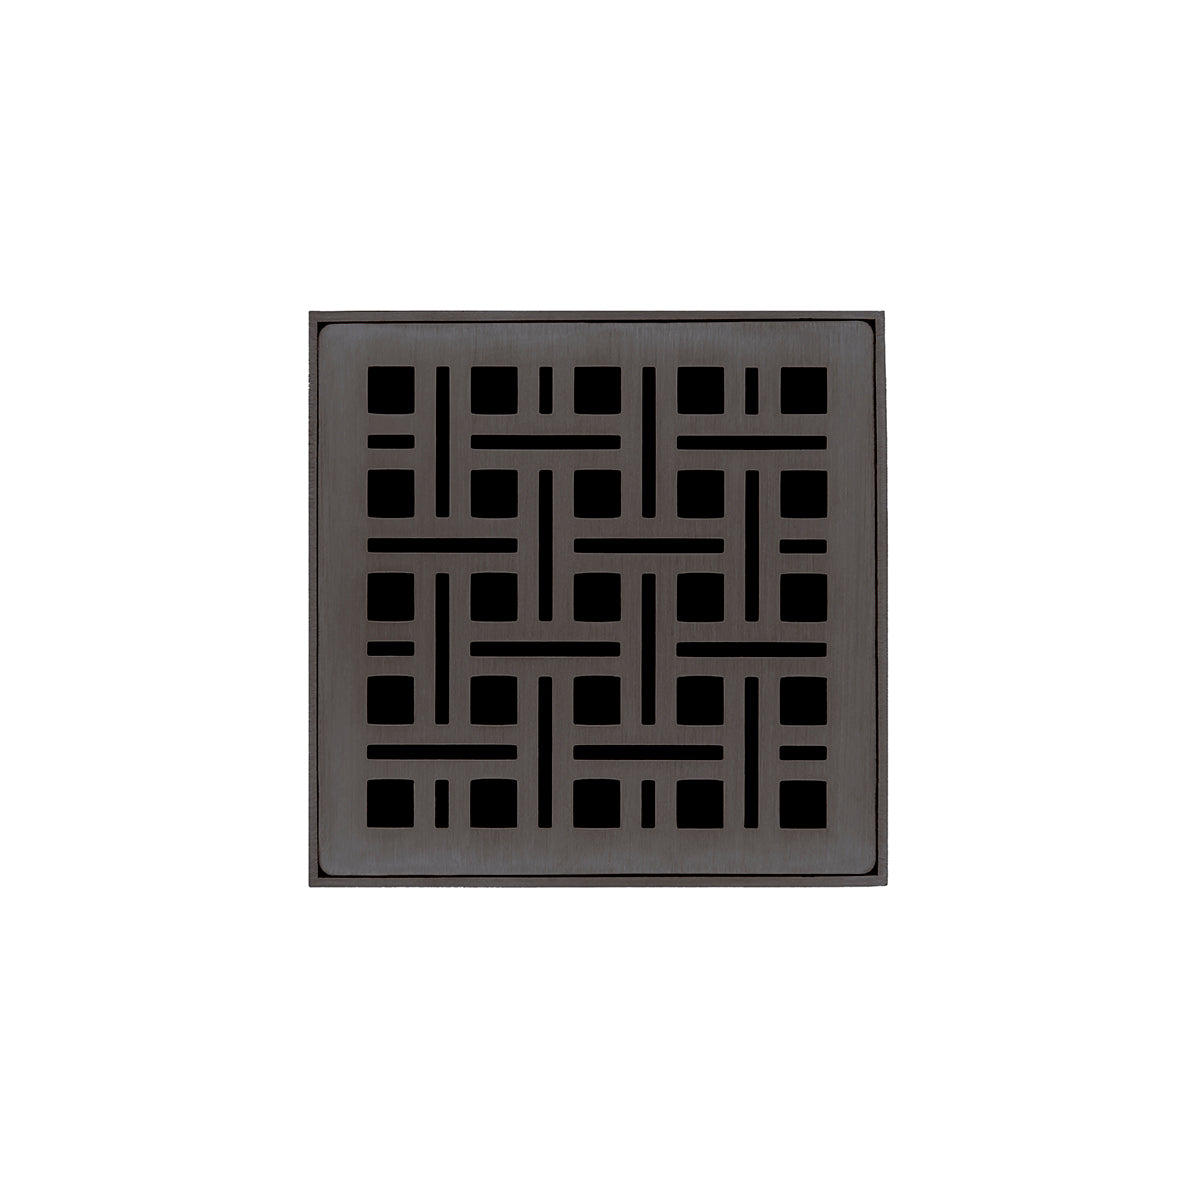 Infinity Drain 4" x 4" VD 4 Premium Center Drain Kit with Weave Pattern Decorative Plate with Cast Iron Drain Body for Hot Mop, 2" Outlet